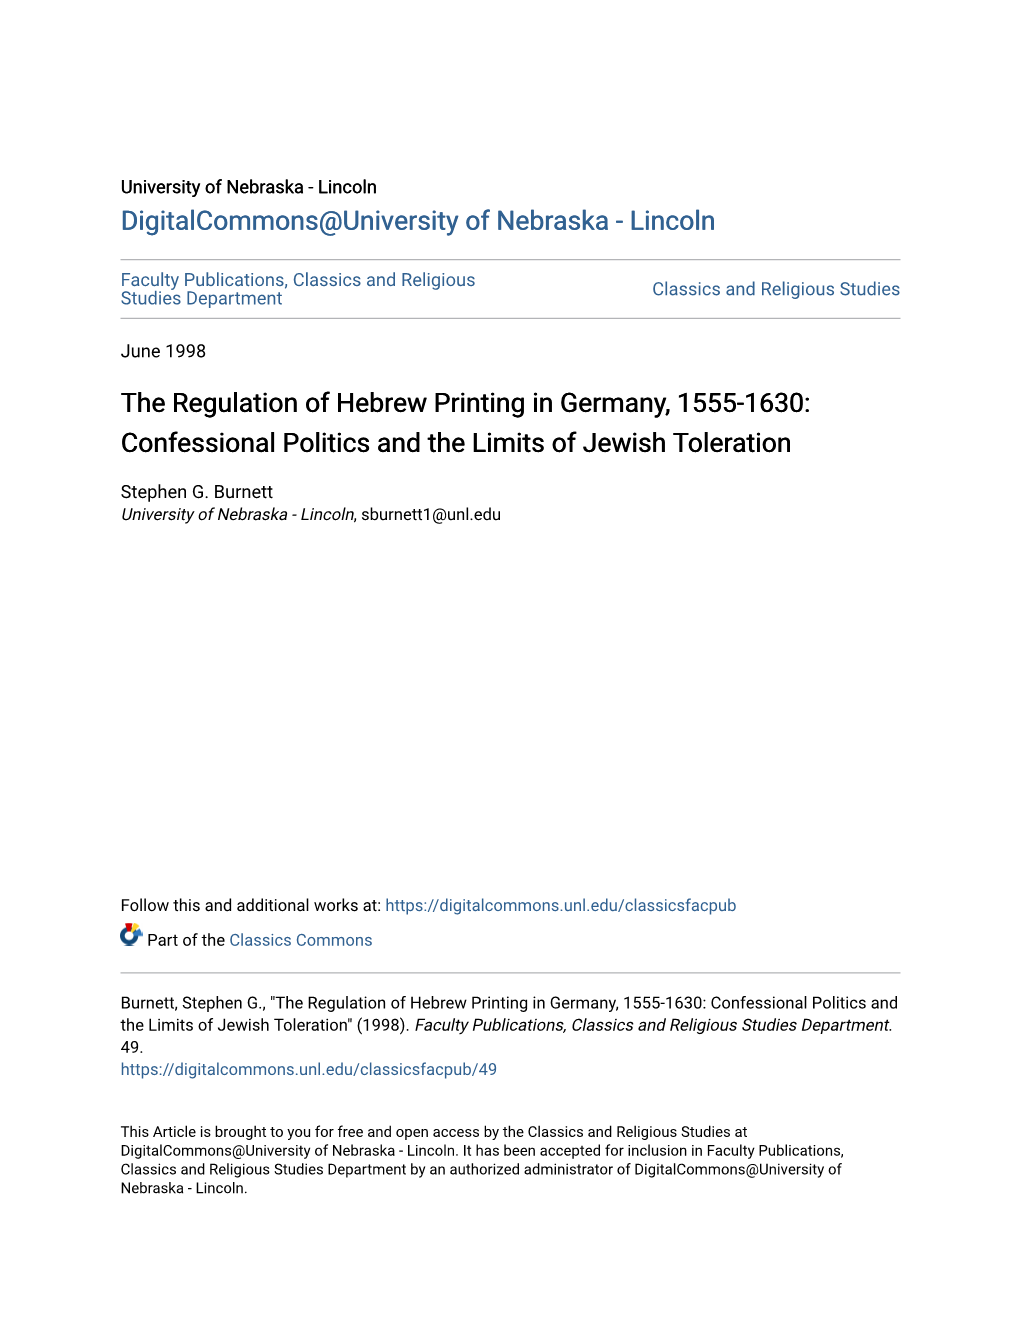 The Regulation of Hebrew Printing in Germany, 1555-1630: Confessional Politics and the Limits of Jewish Toleration